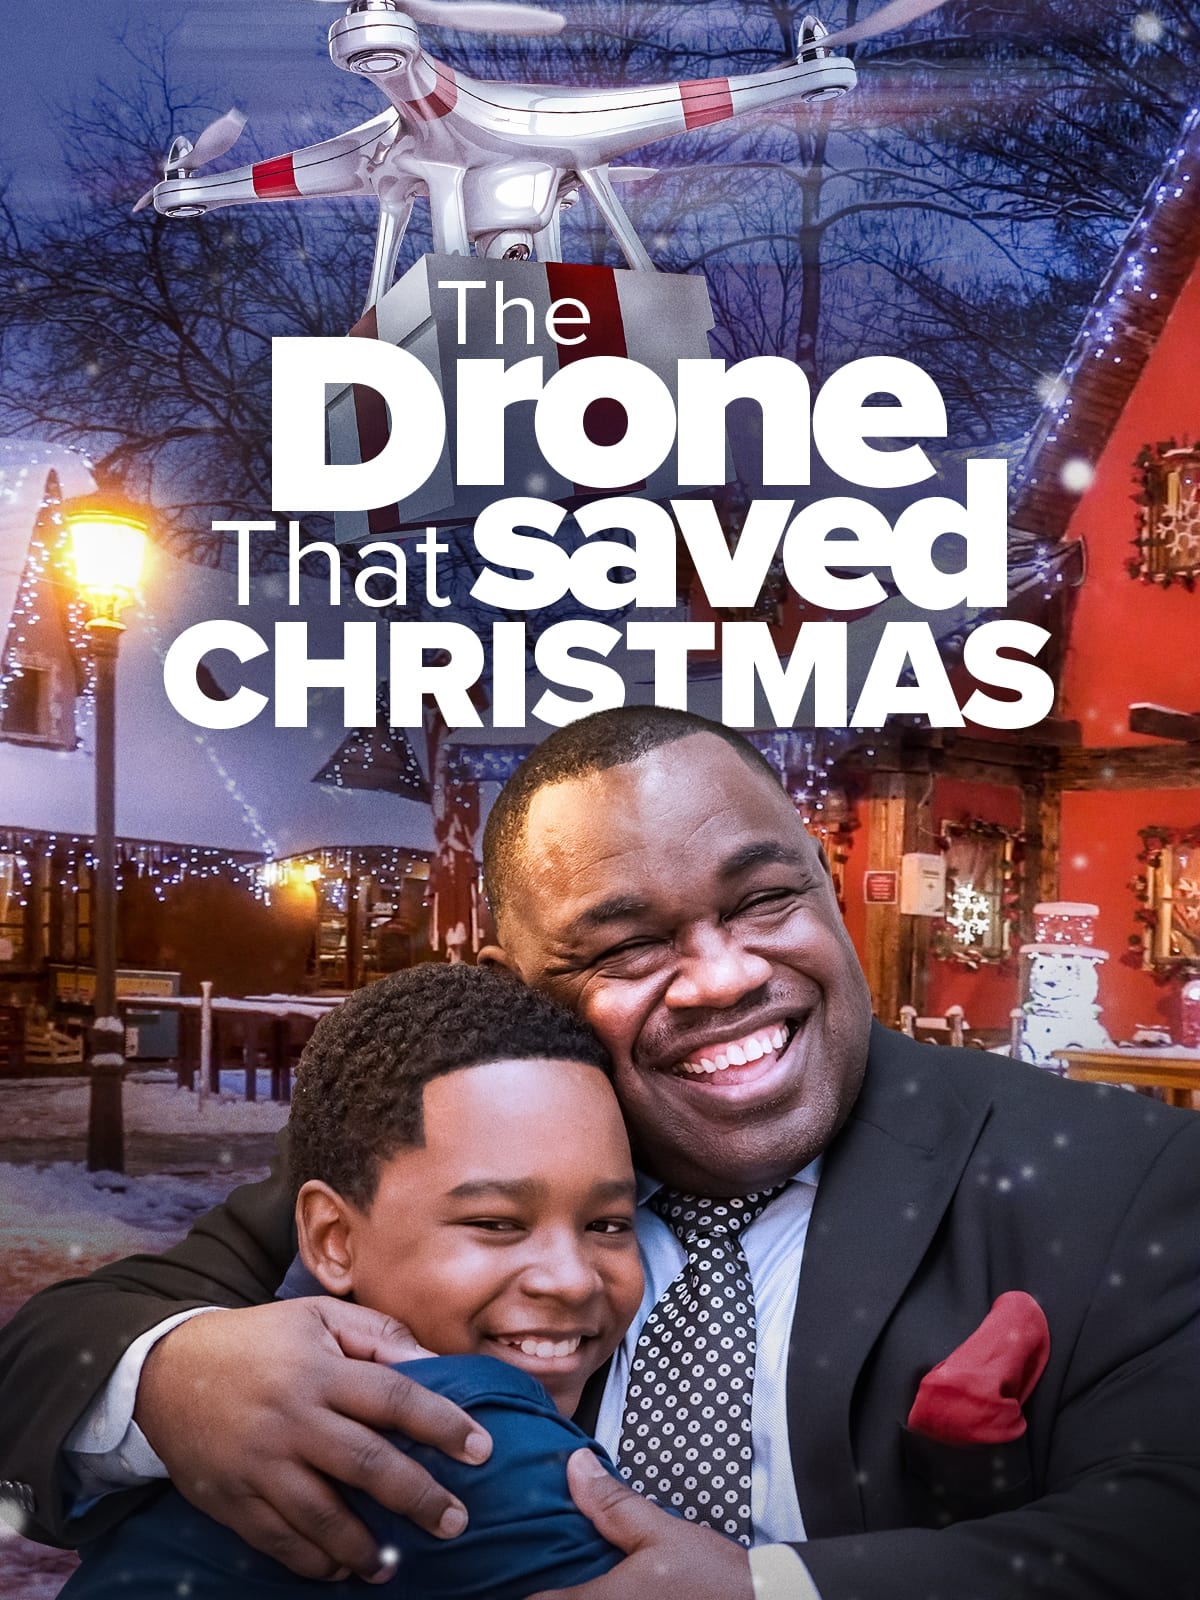 The Drone that Saved Christmas